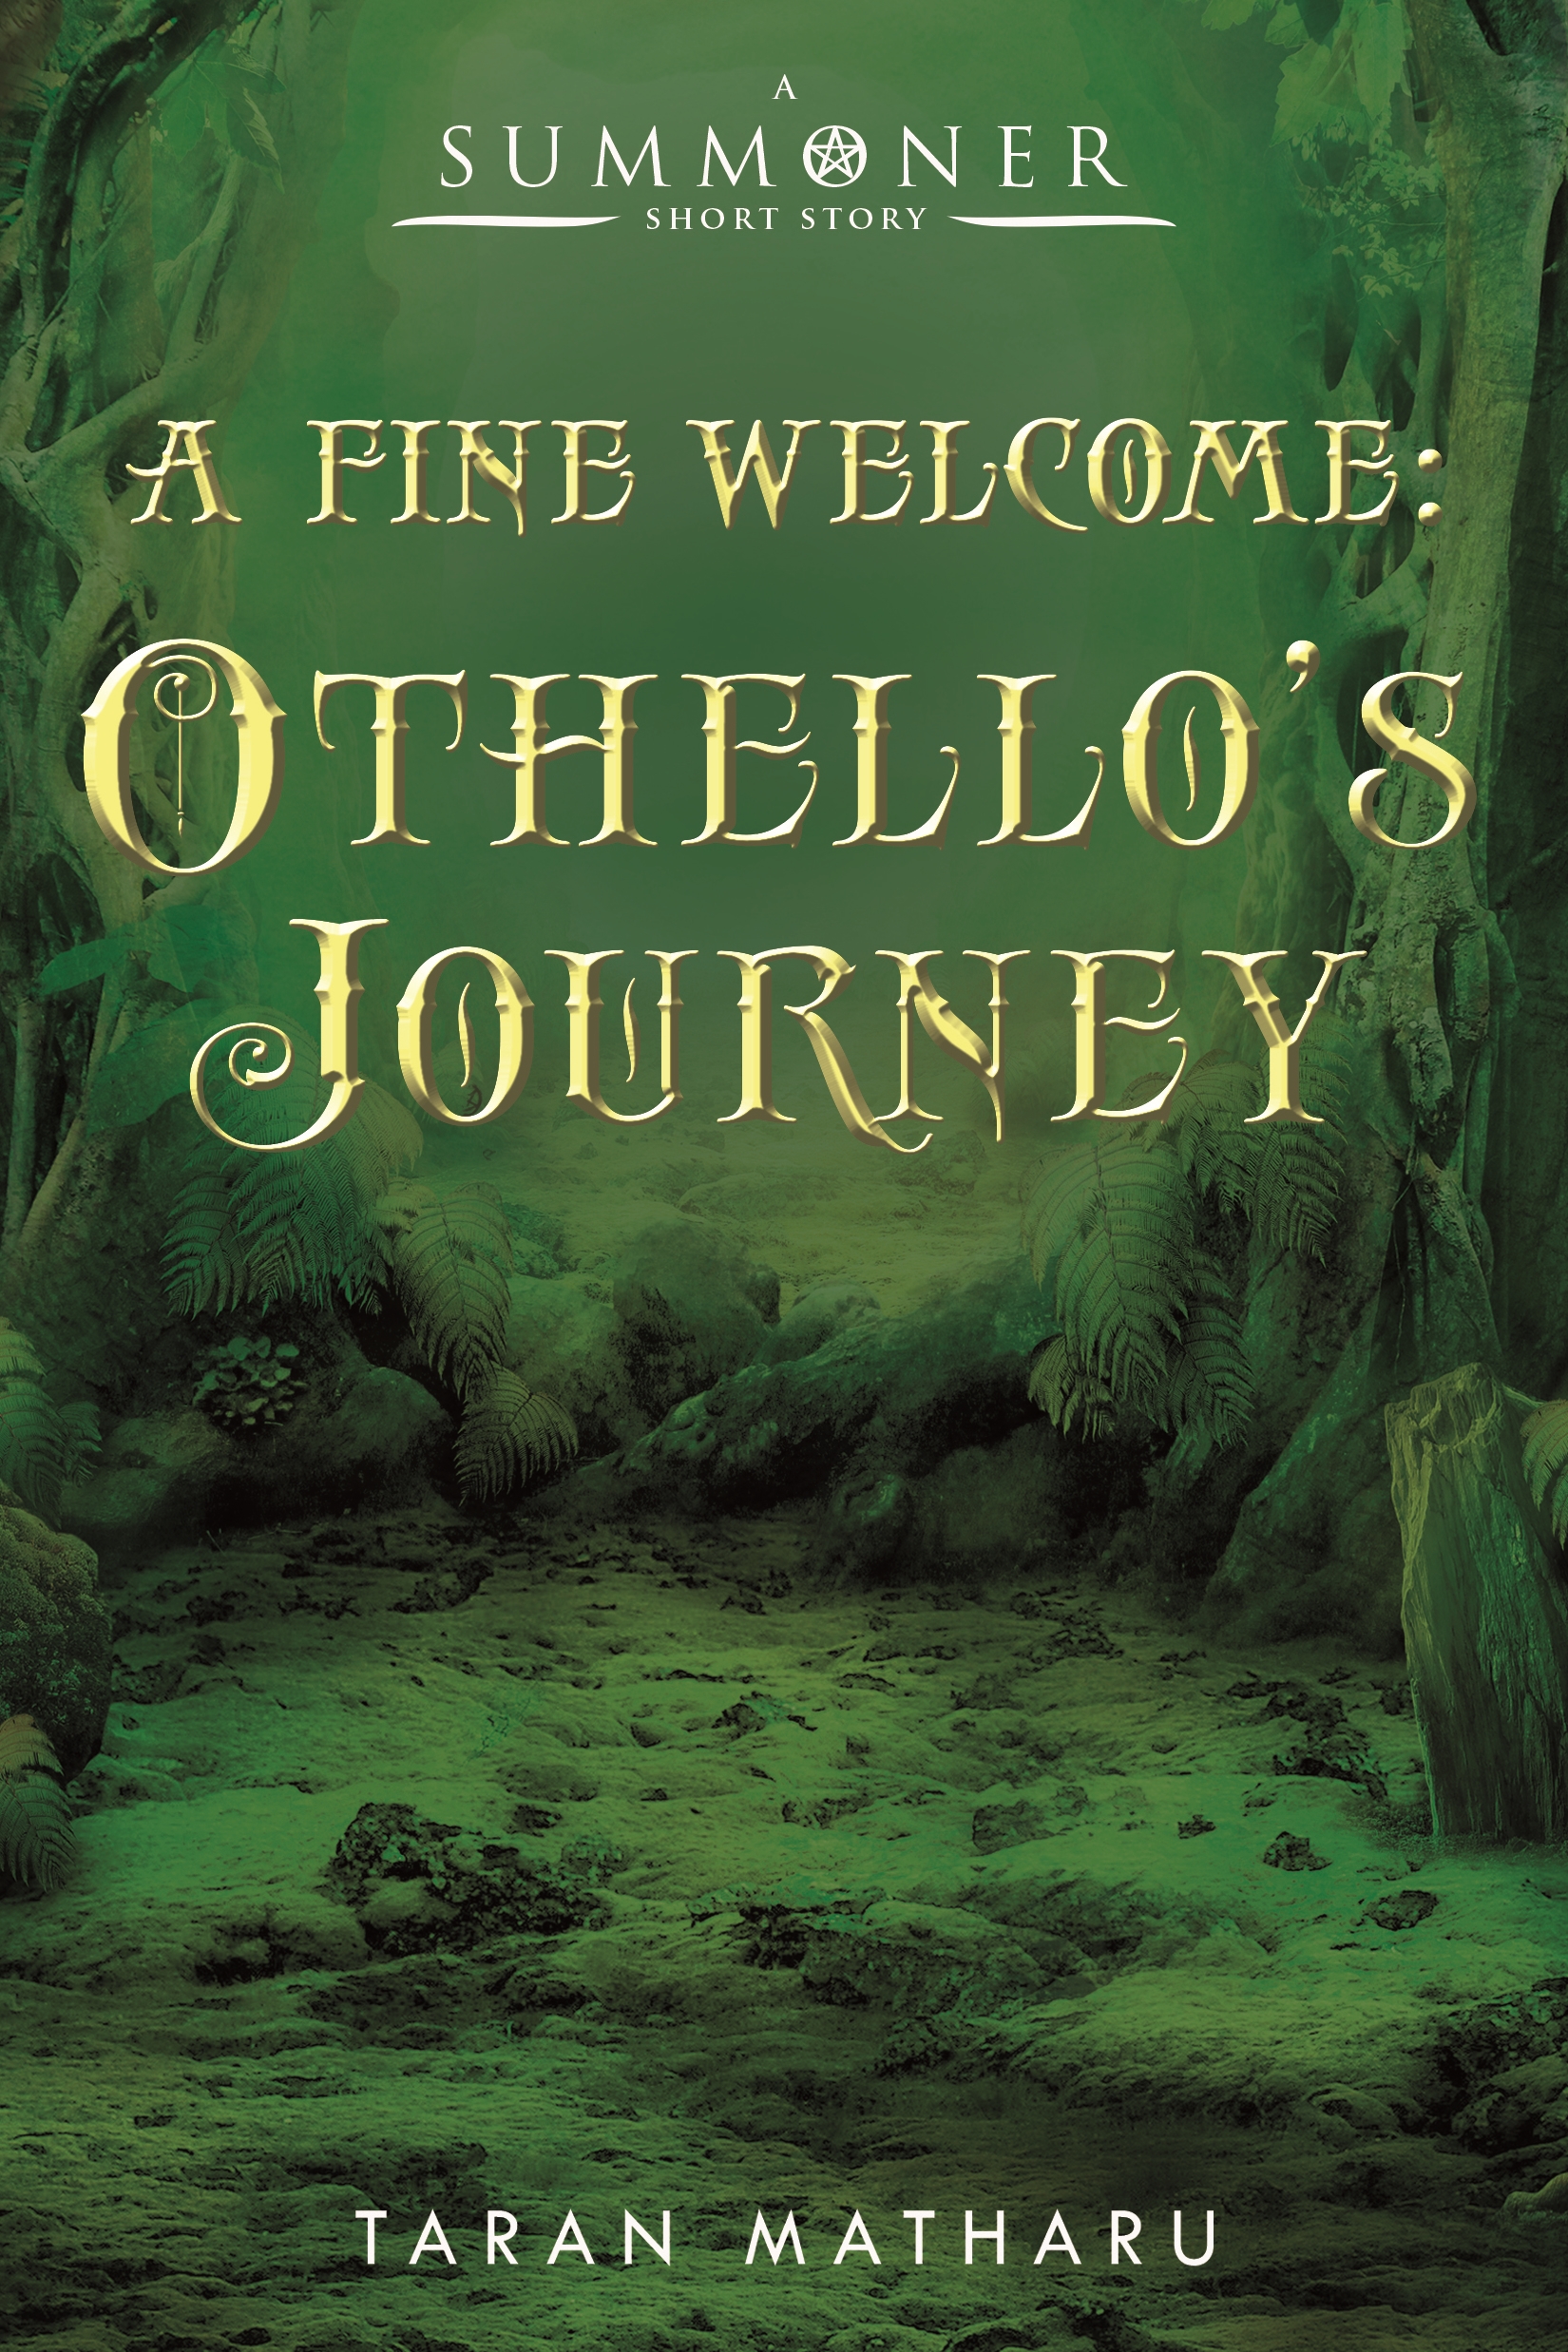 A Fine Welcome: Othello’s Journey